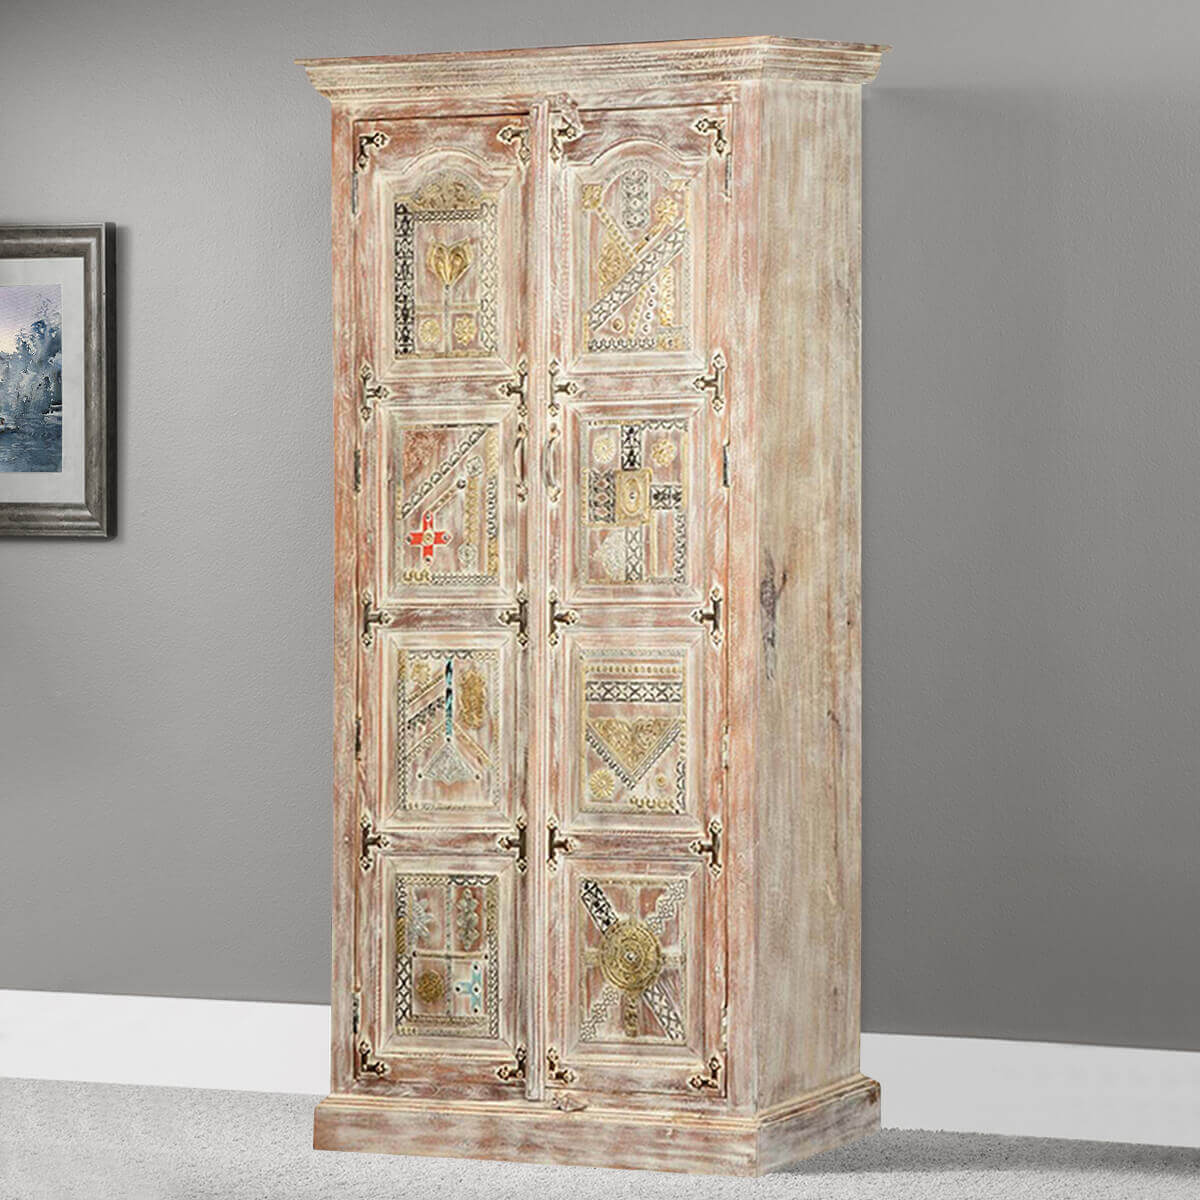 https://www.sierralivingconcepts.com/images/thumbs/0393214_modern-mosaic-brass-inlay-solid-wood-tall-storage-cabinet.jpeg